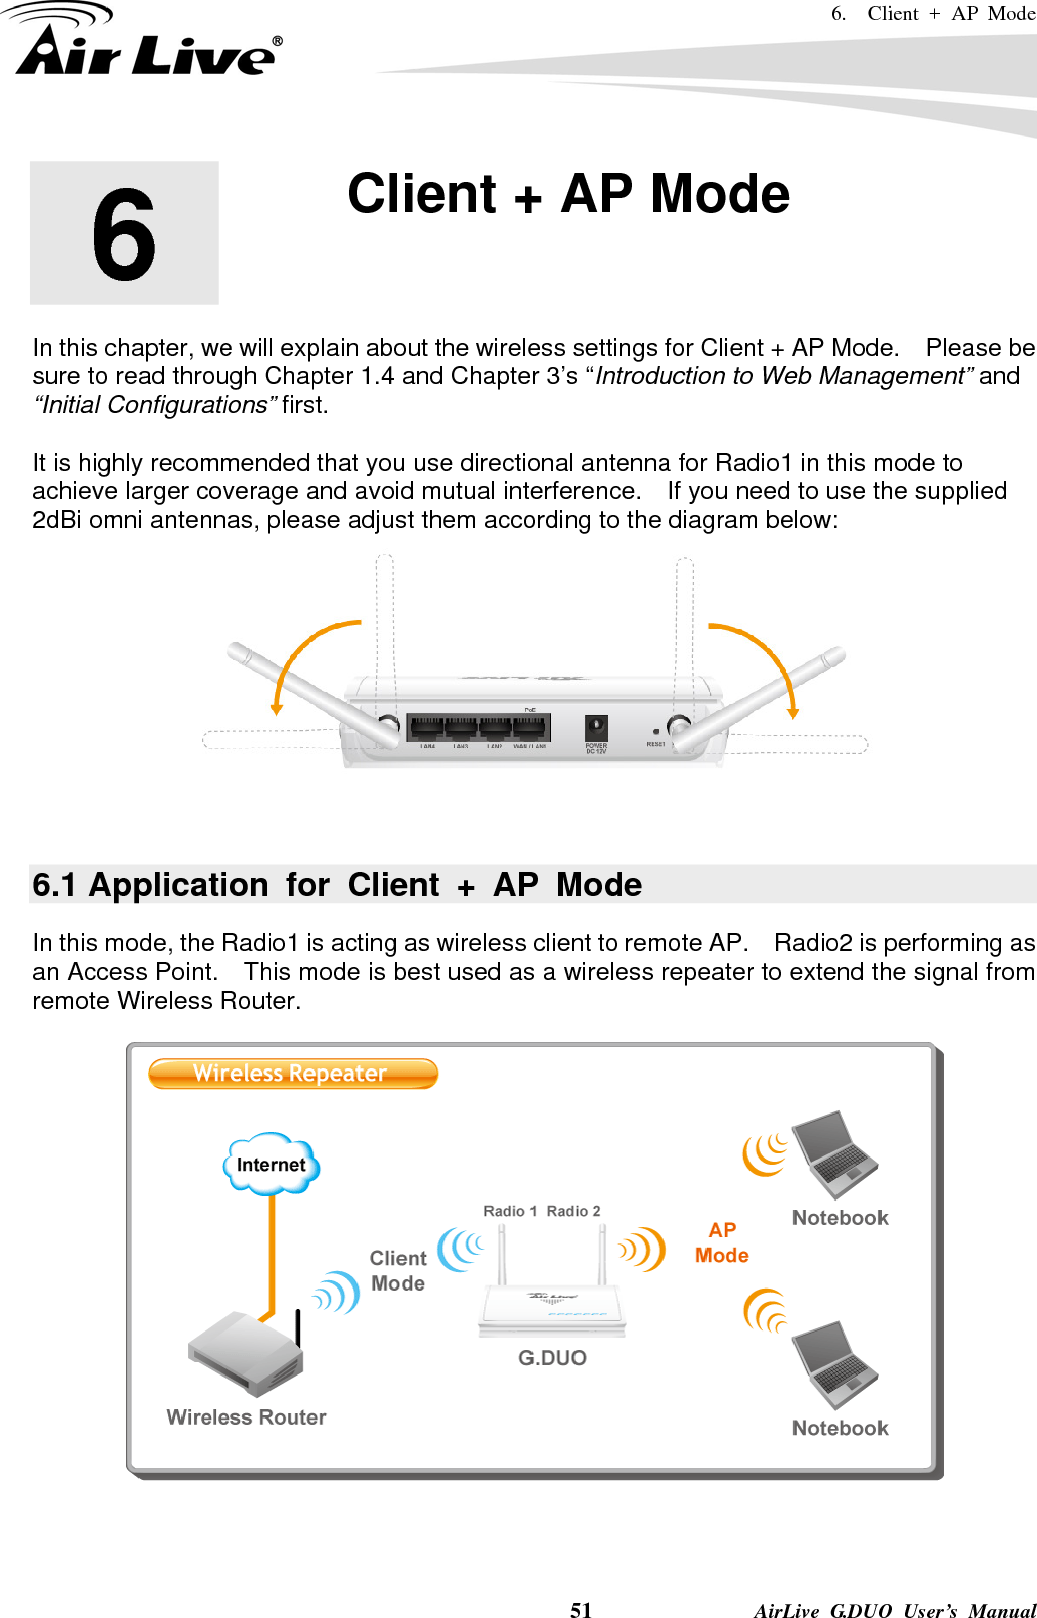 6.  Client + AP Mode    51              AirLive G.DUO User’s Manual       In this chapter, we will explain about the wireless settings for Client + AP Mode.    Please be sure to read through Chapter 1.4 and Chapter 3’s “Introduction to Web Management” and “Initial Configurations” first.    It is highly recommended that you use directional antenna for Radio1 in this mode to achieve larger coverage and avoid mutual interference.    If you need to use the supplied 2dBi omni antennas, please adjust them according to the diagram below:   6.1 Application for Client + AP Mode In this mode, the Radio1 is acting as wireless client to remote AP.    Radio2 is performing as an Access Point.    This mode is best used as a wireless repeater to extend the signal from remote Wireless Router.   6  6. Client + AP Mode  